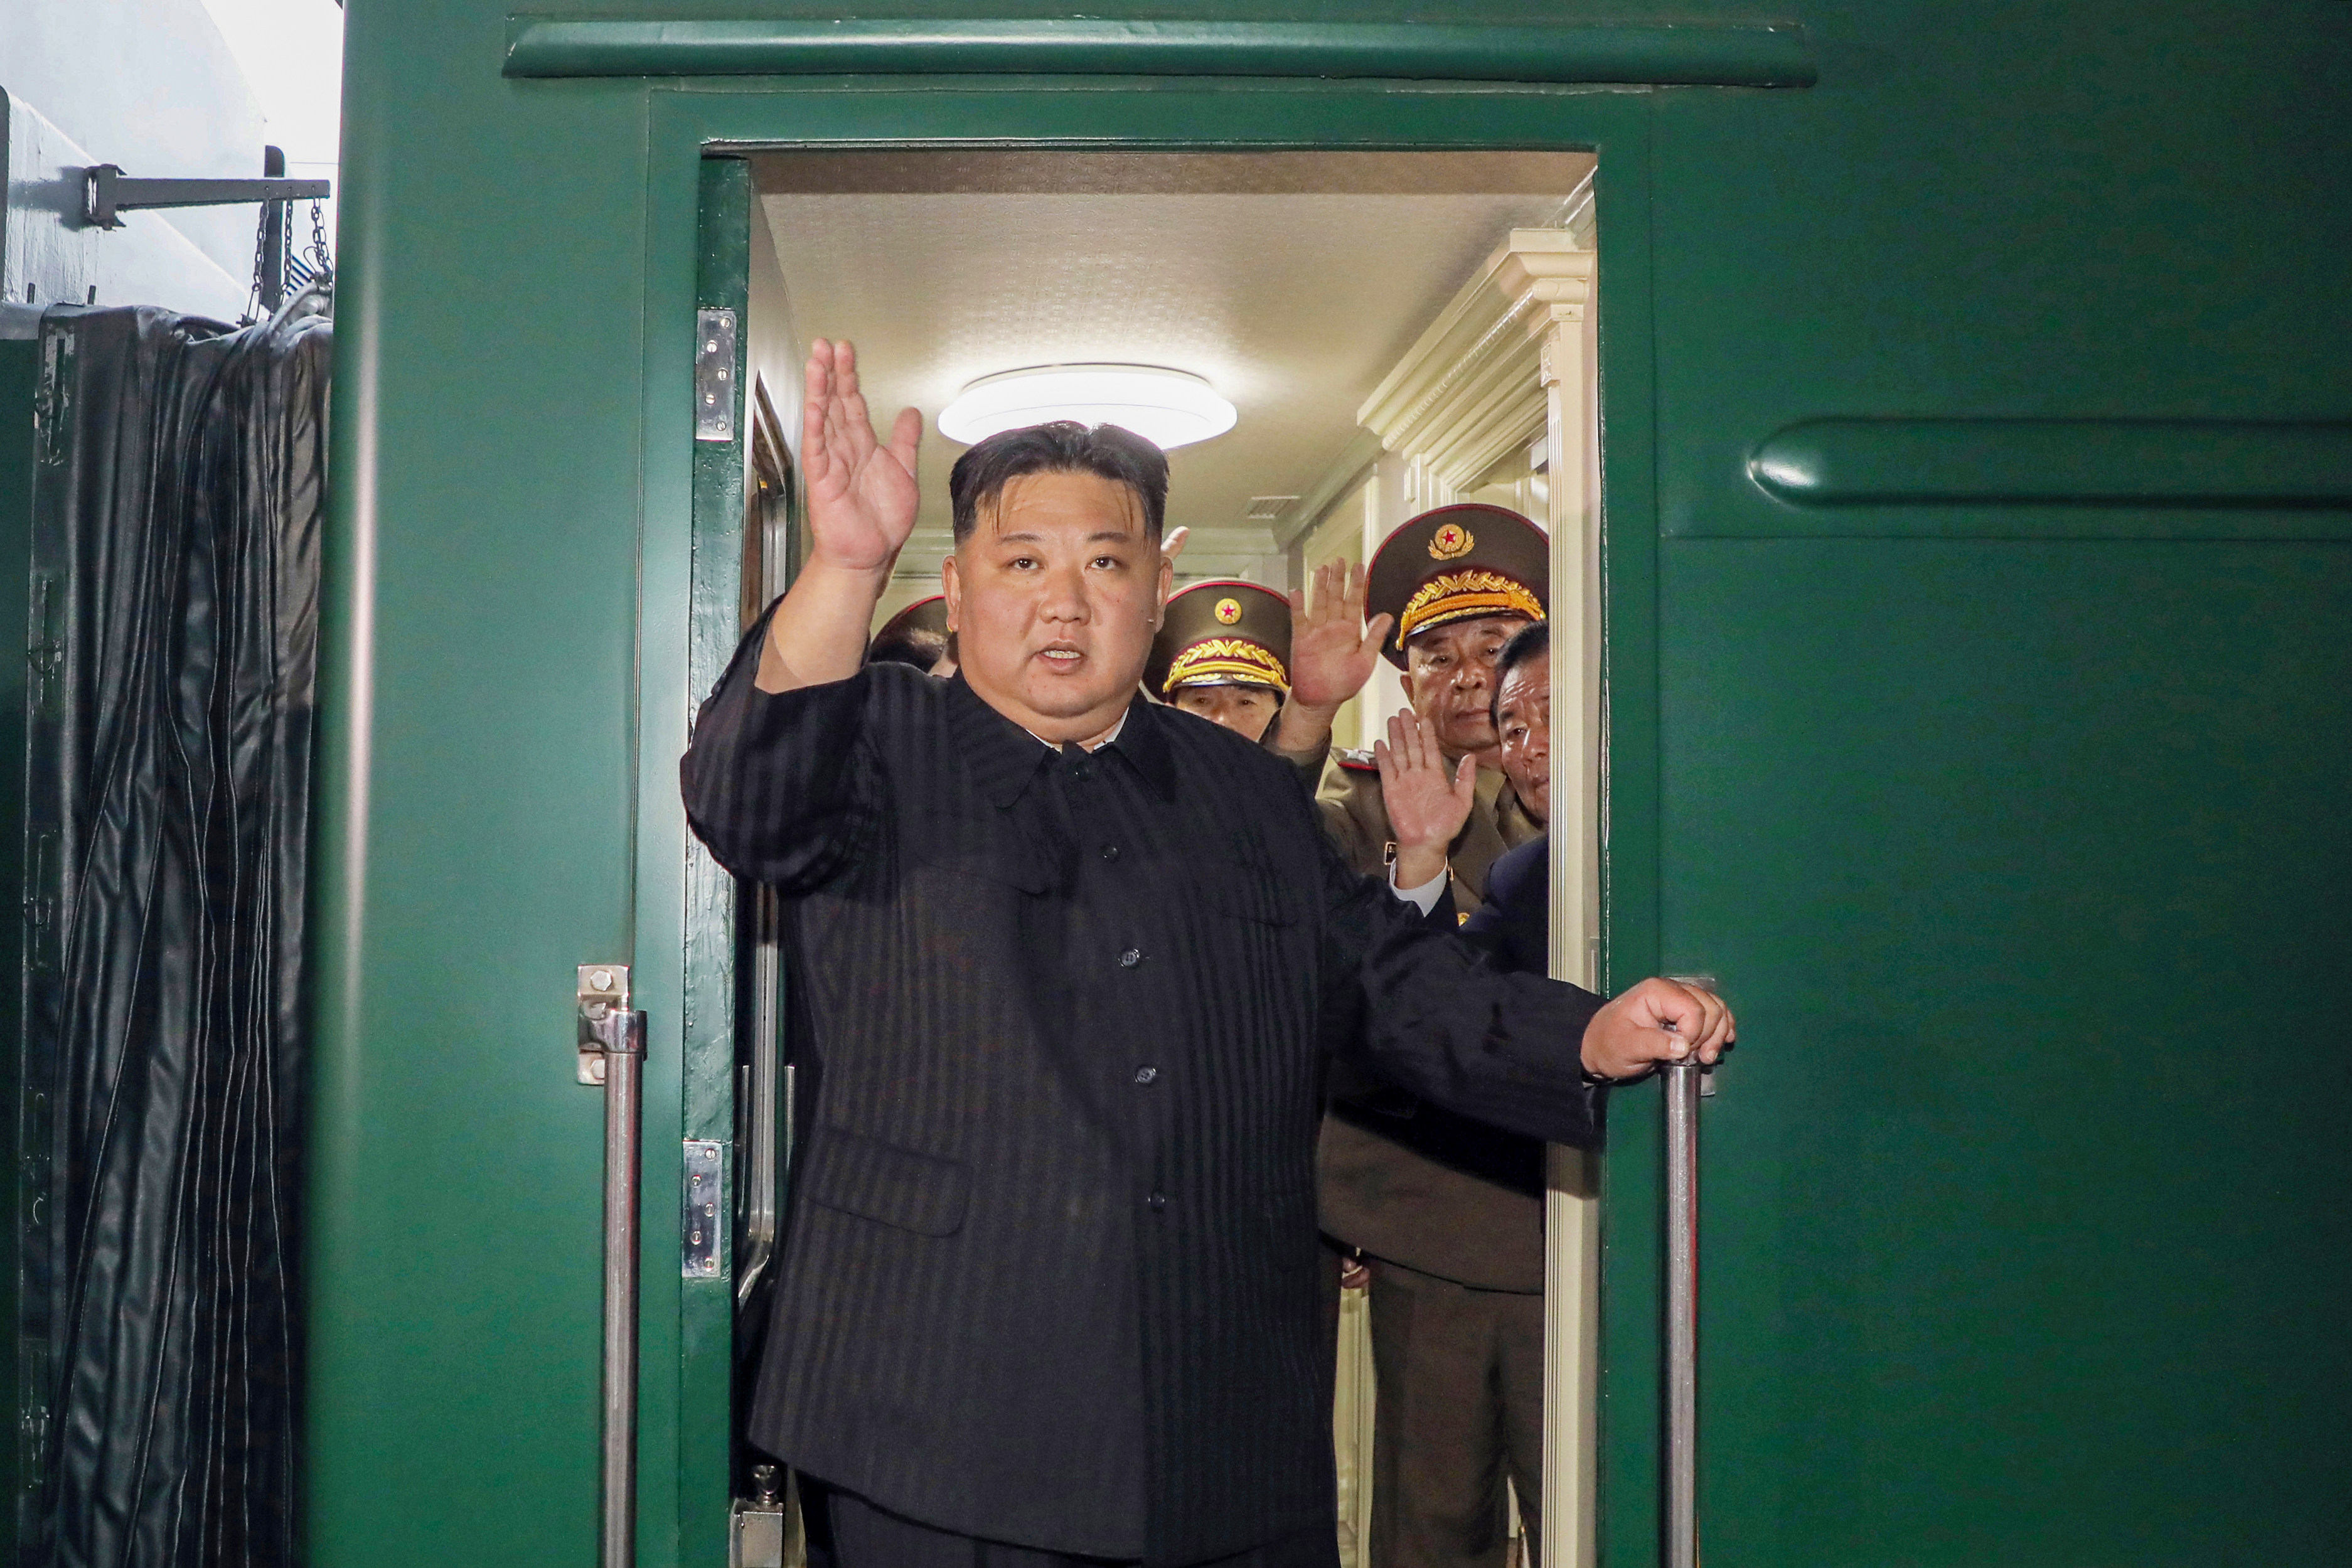 North Korean leader Kim Jong-un waves as he boards a train in Pyongyang on Sunday to hold talks with Russian President Vladimir Putin. Photo: KCNA/dpa